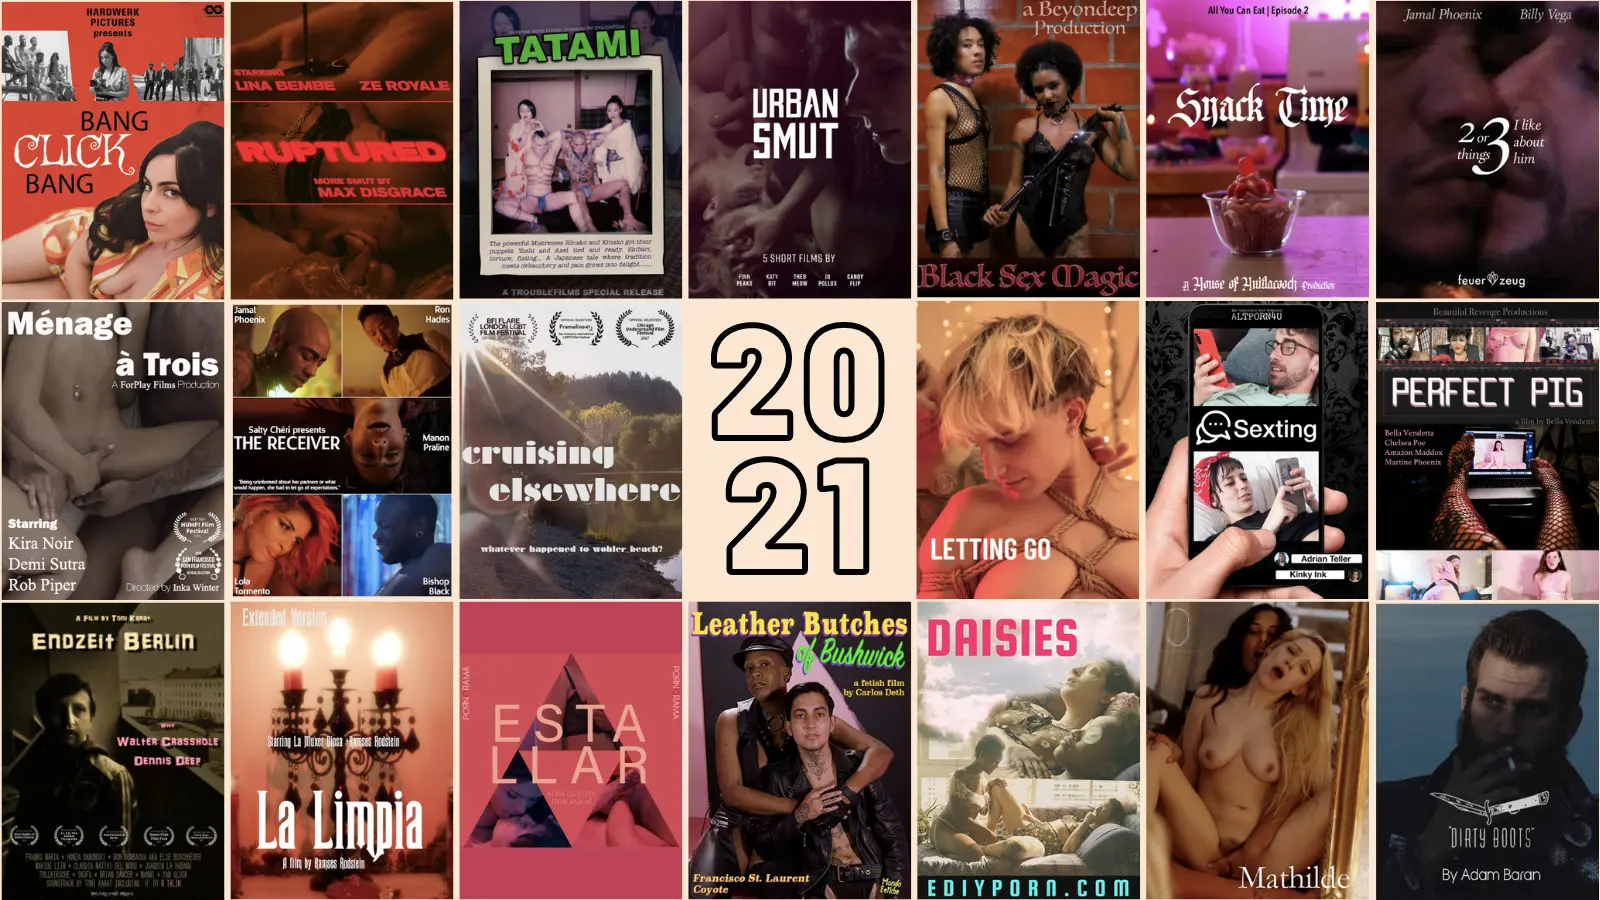 Explore Your Erotic Side with HD Movies Hub's High Definition Movies